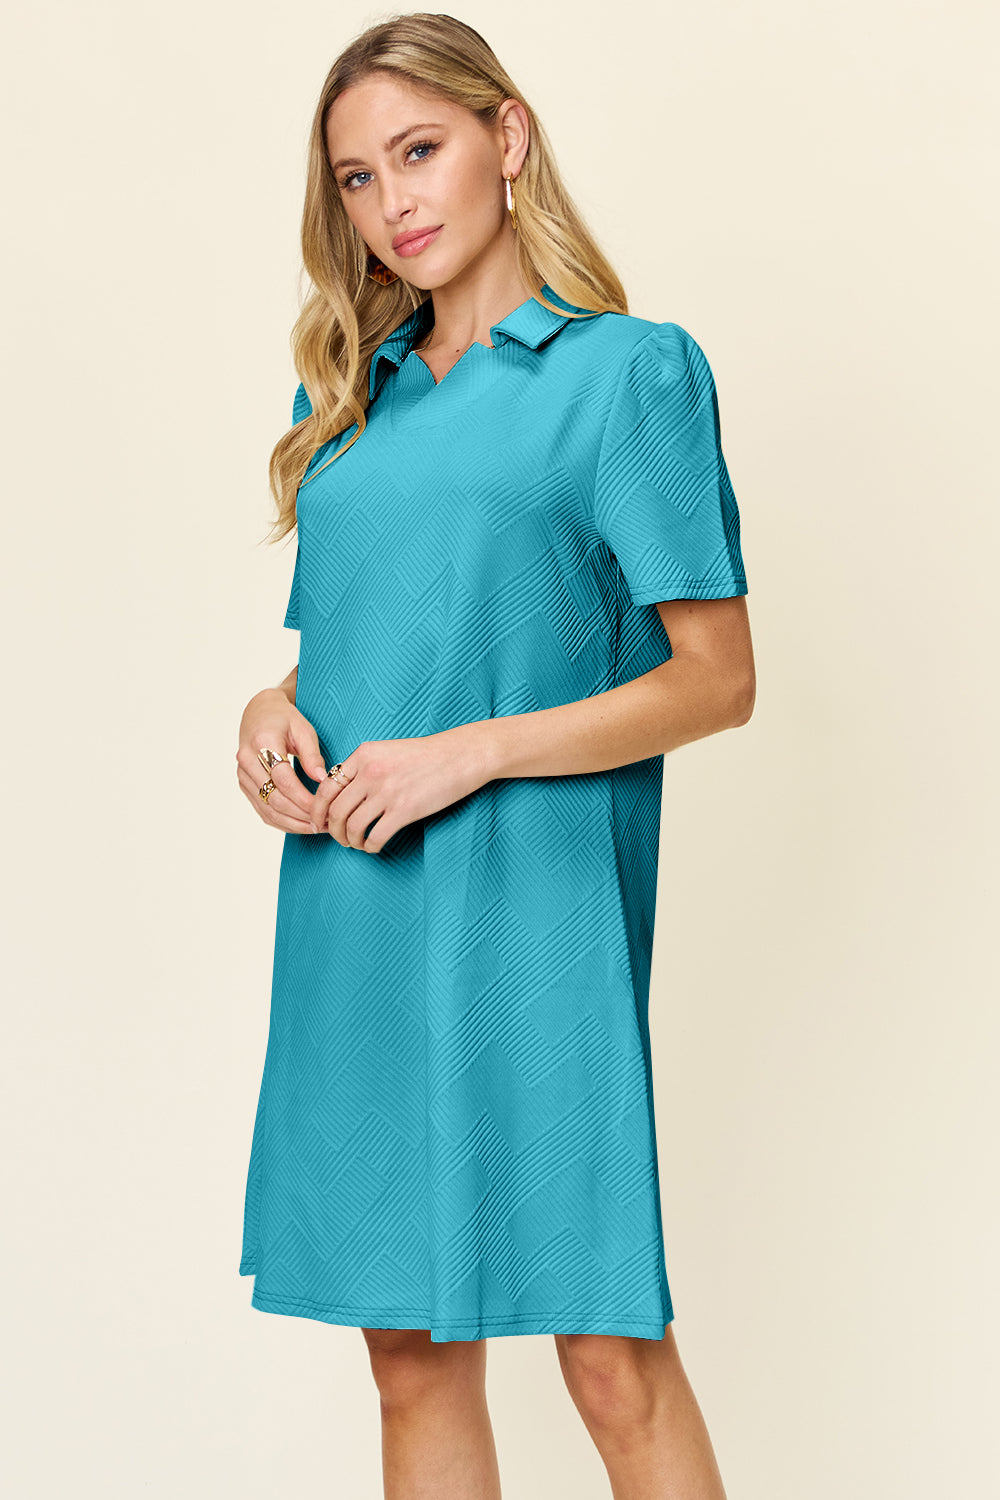 Double Take Full Size Texture Collared Neck Short Sleeve Dress Pastel Blue L